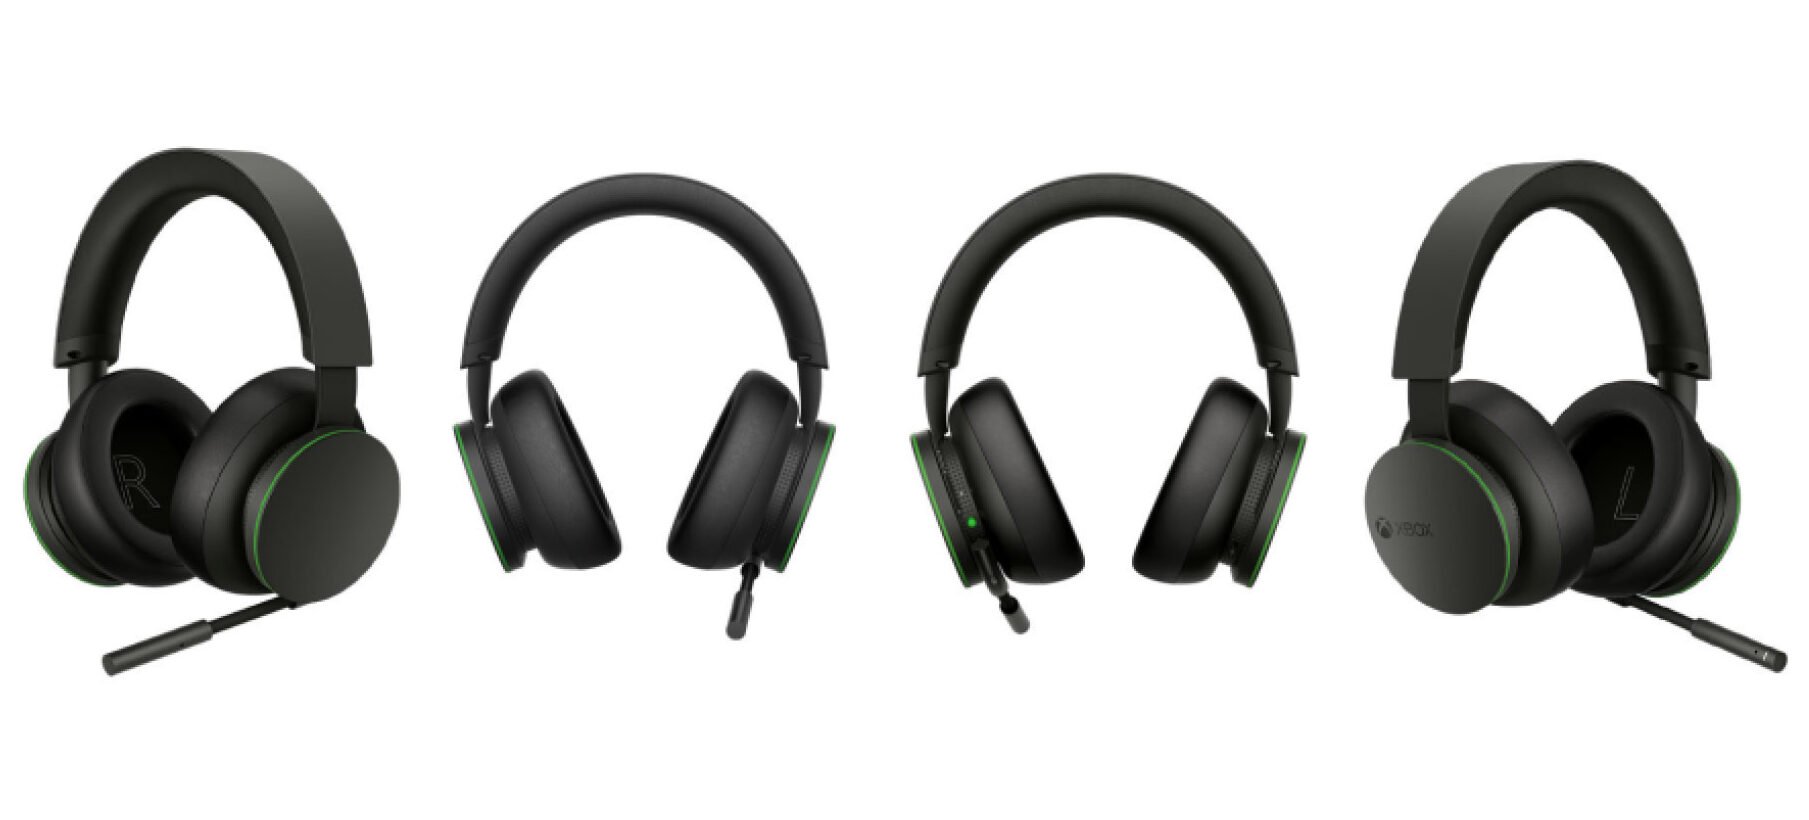 Xbox Wireless Headset featured